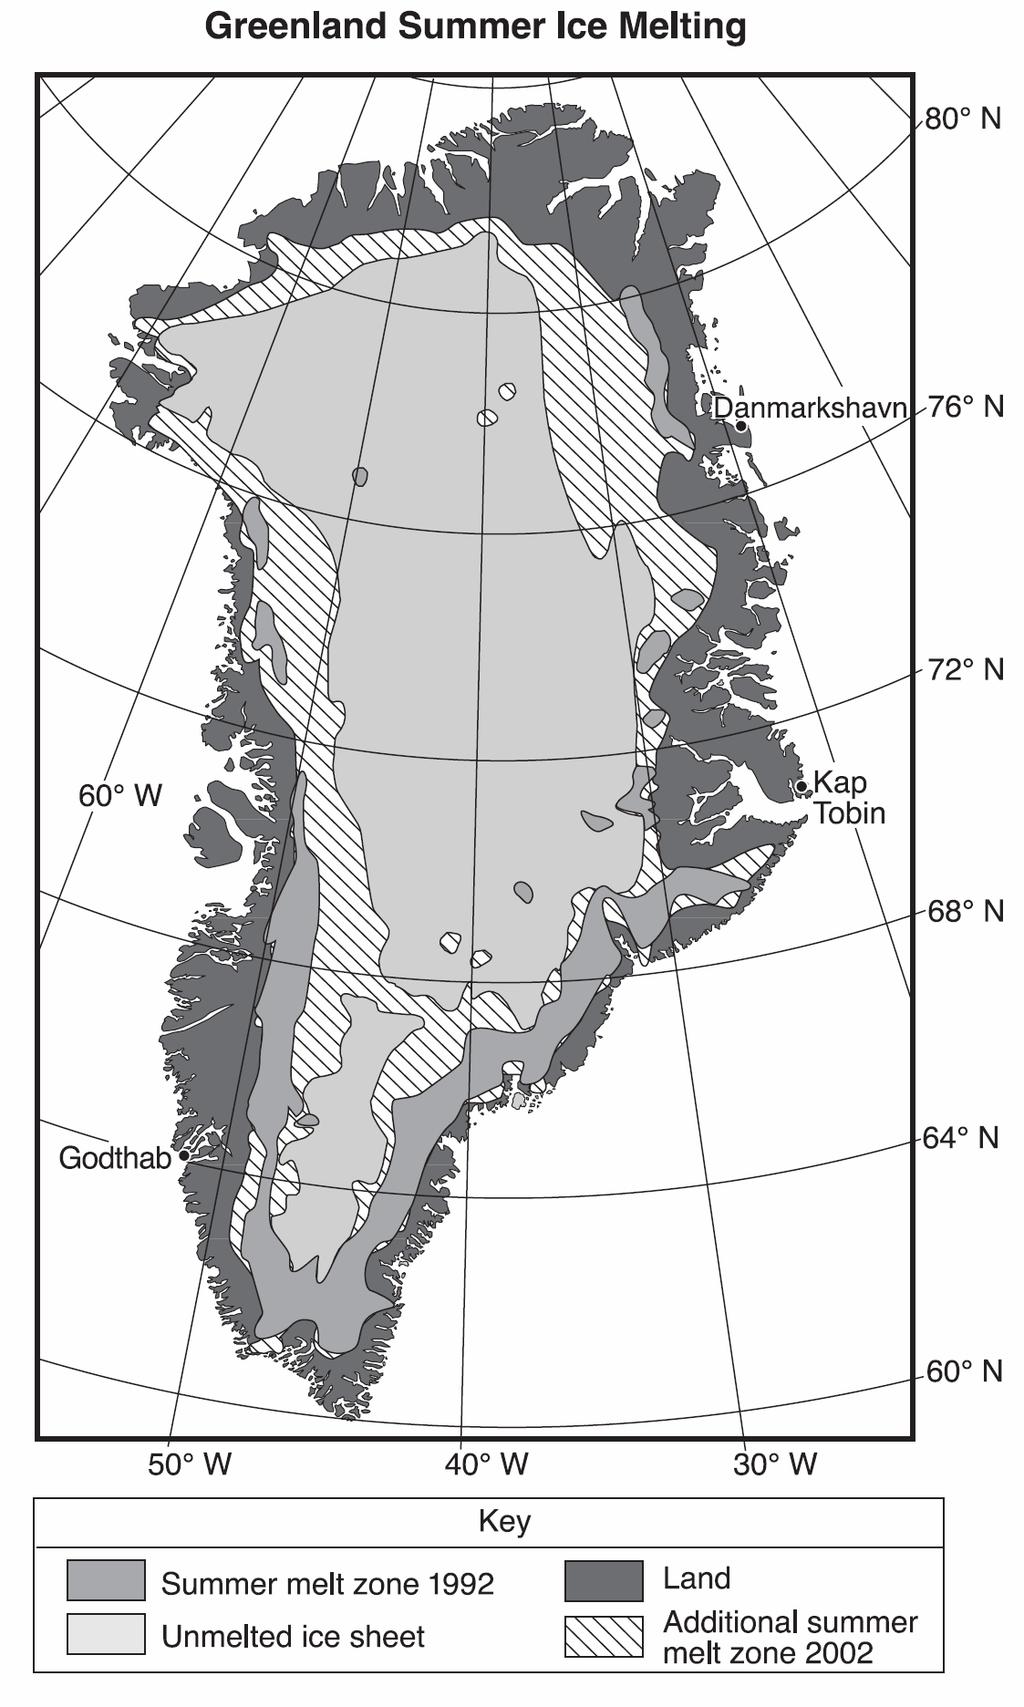 20. Base your answer to the following question on the following map and passage. The map shows the extent of summer ice-melt zones on Greenland in 1992 and 2002.